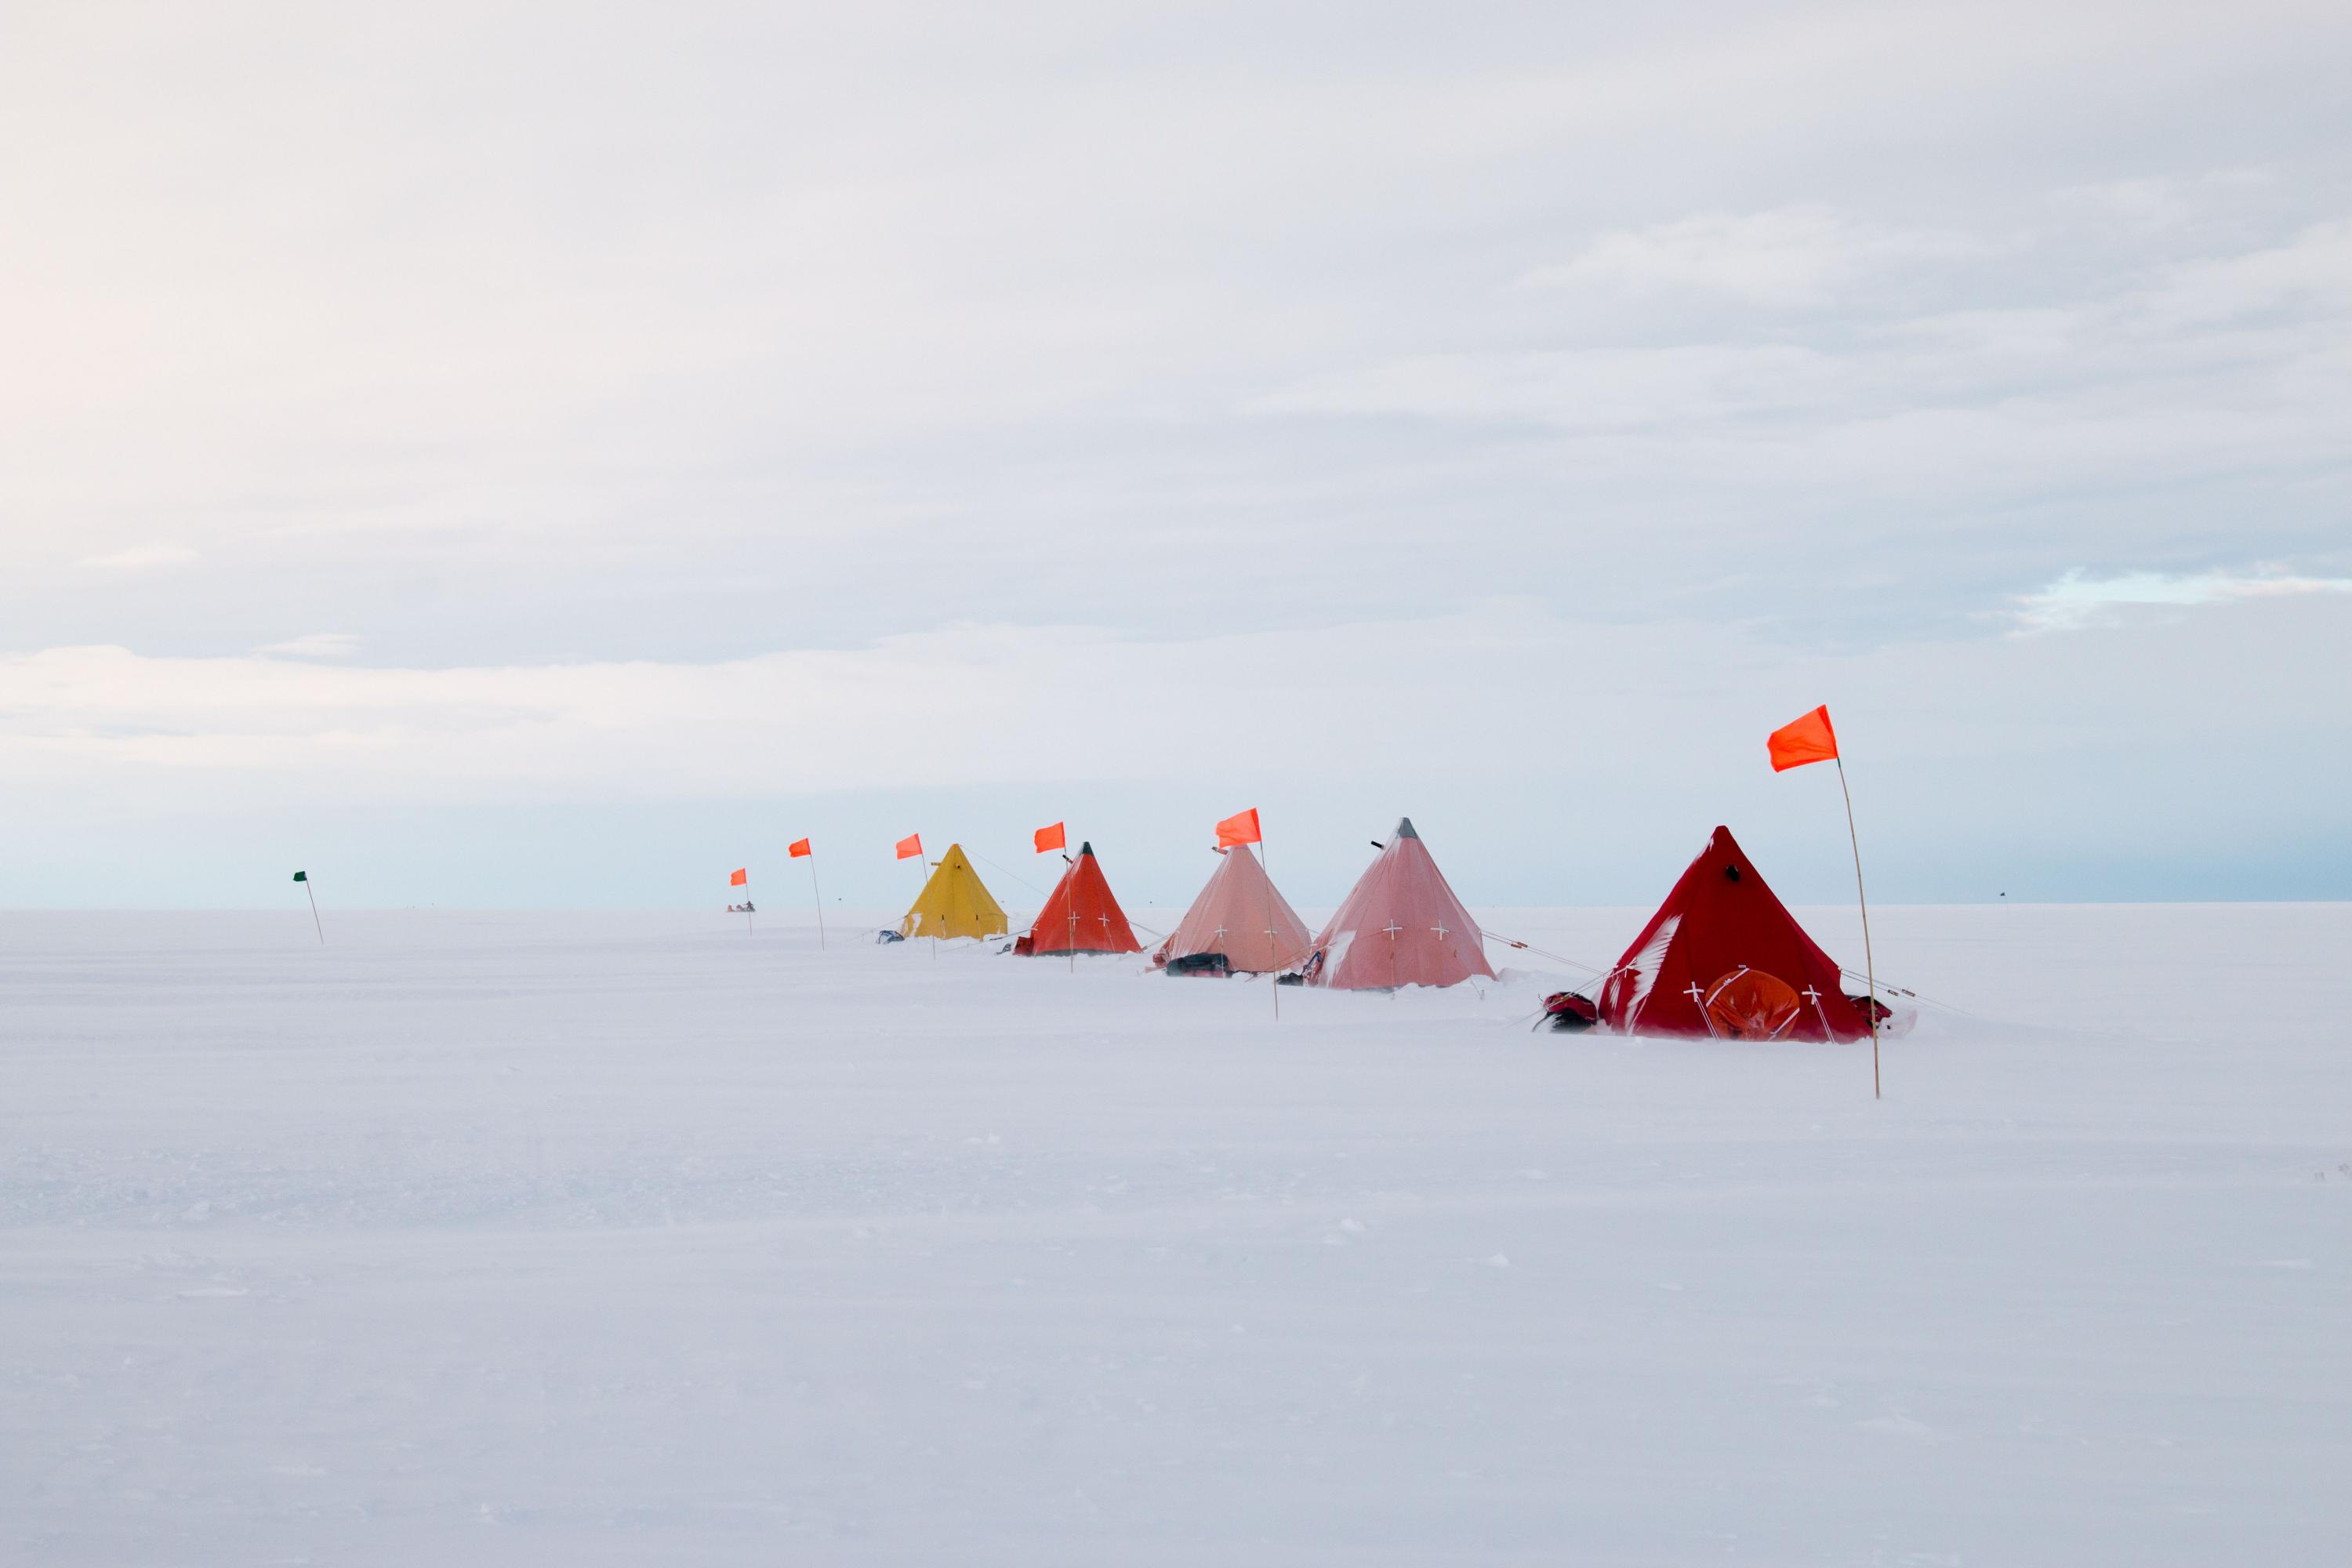 The camp of the research team that included Britney Schmidt on Thwaites Glacier hundreds of meters atop the glacier's very critical grounding zone. The crew lived and researched here for two months out in the open in Antarctica. Credit: International Thwaites Glacier Collaboration / Georgia Tech-Schmidt / Dichek